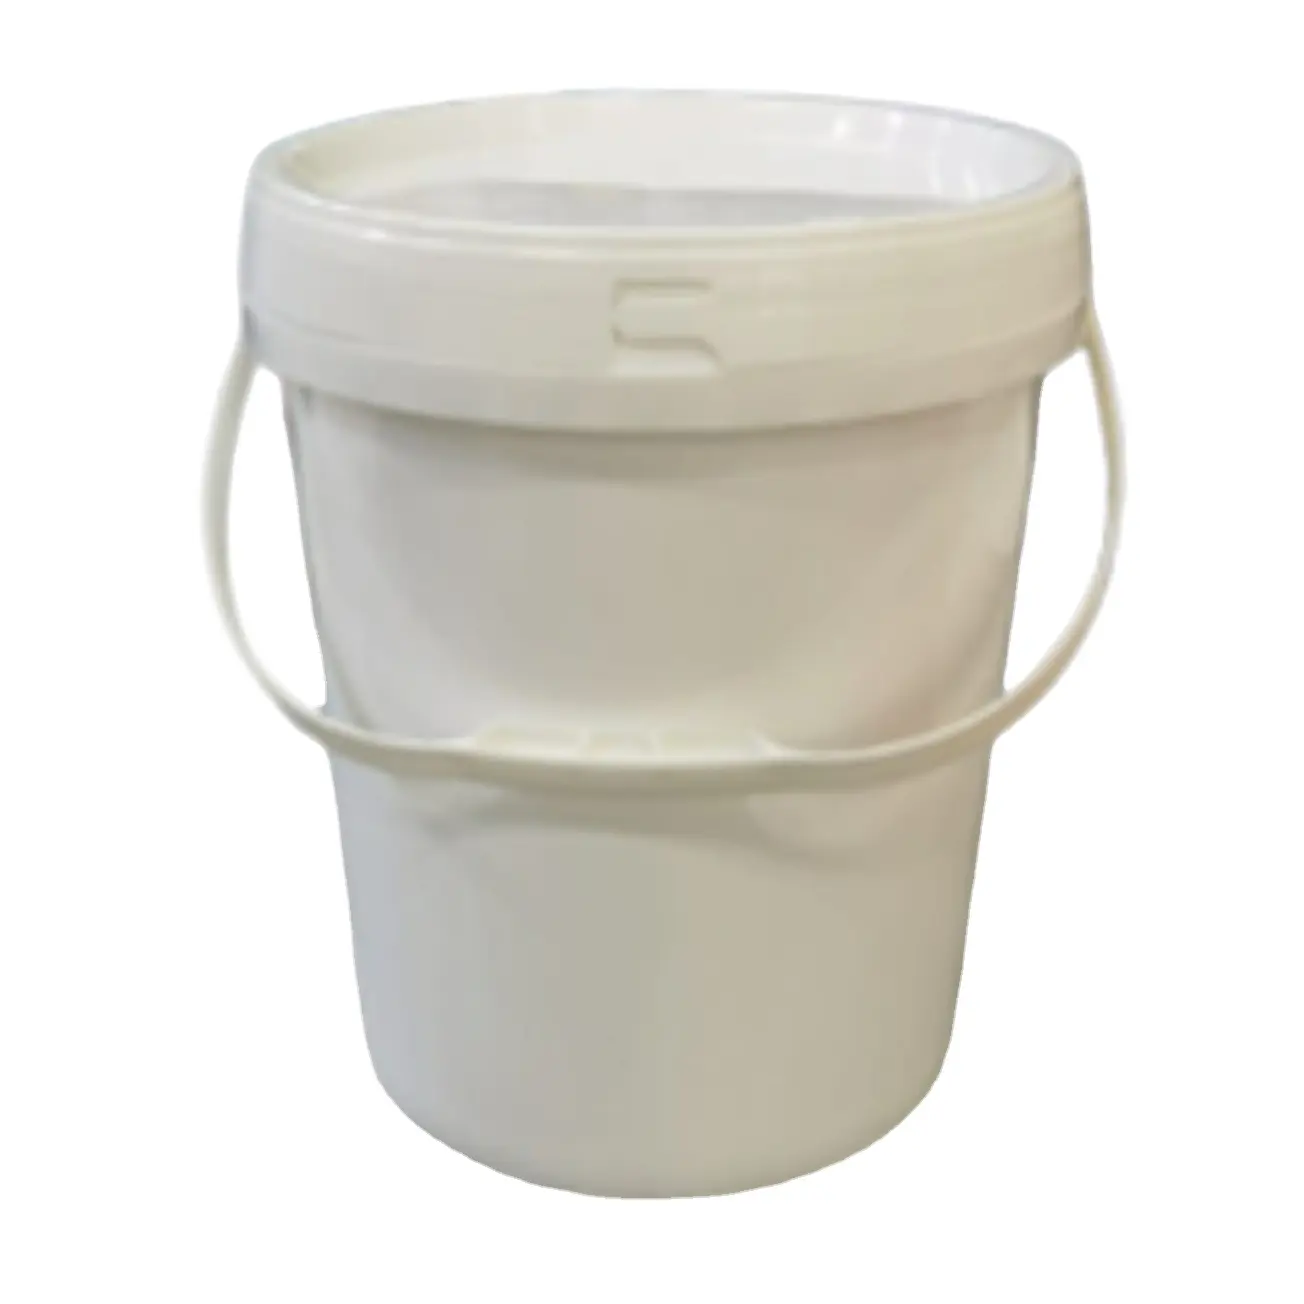 Good Pricing 5L Tapered Pail Industrial Tapered Pail Heavy Duty Tapered Polypropylene Pails Tight & Secure Seal Prevent Leakage